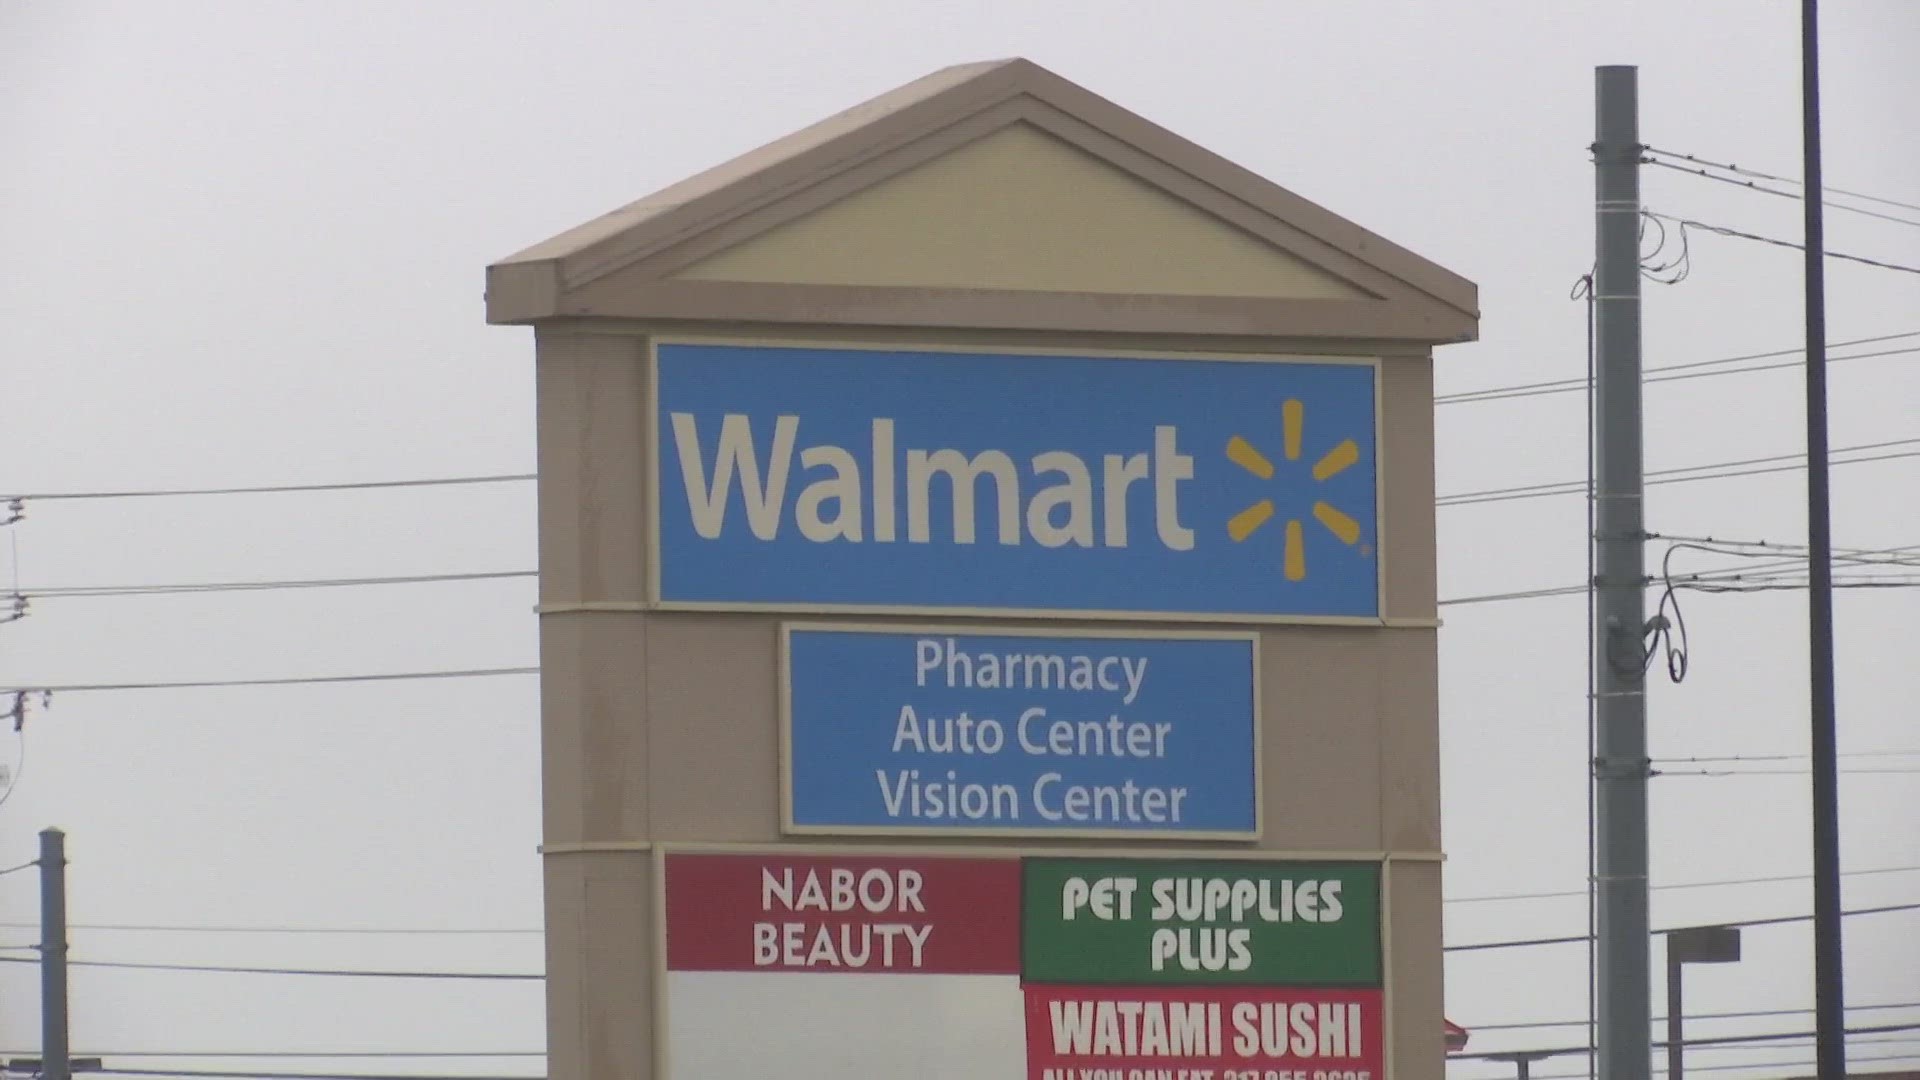 The Marion County Public Health Department suspended the license of the Walmart on Pendleton Pike after a complaint from a customer about mice in the store.